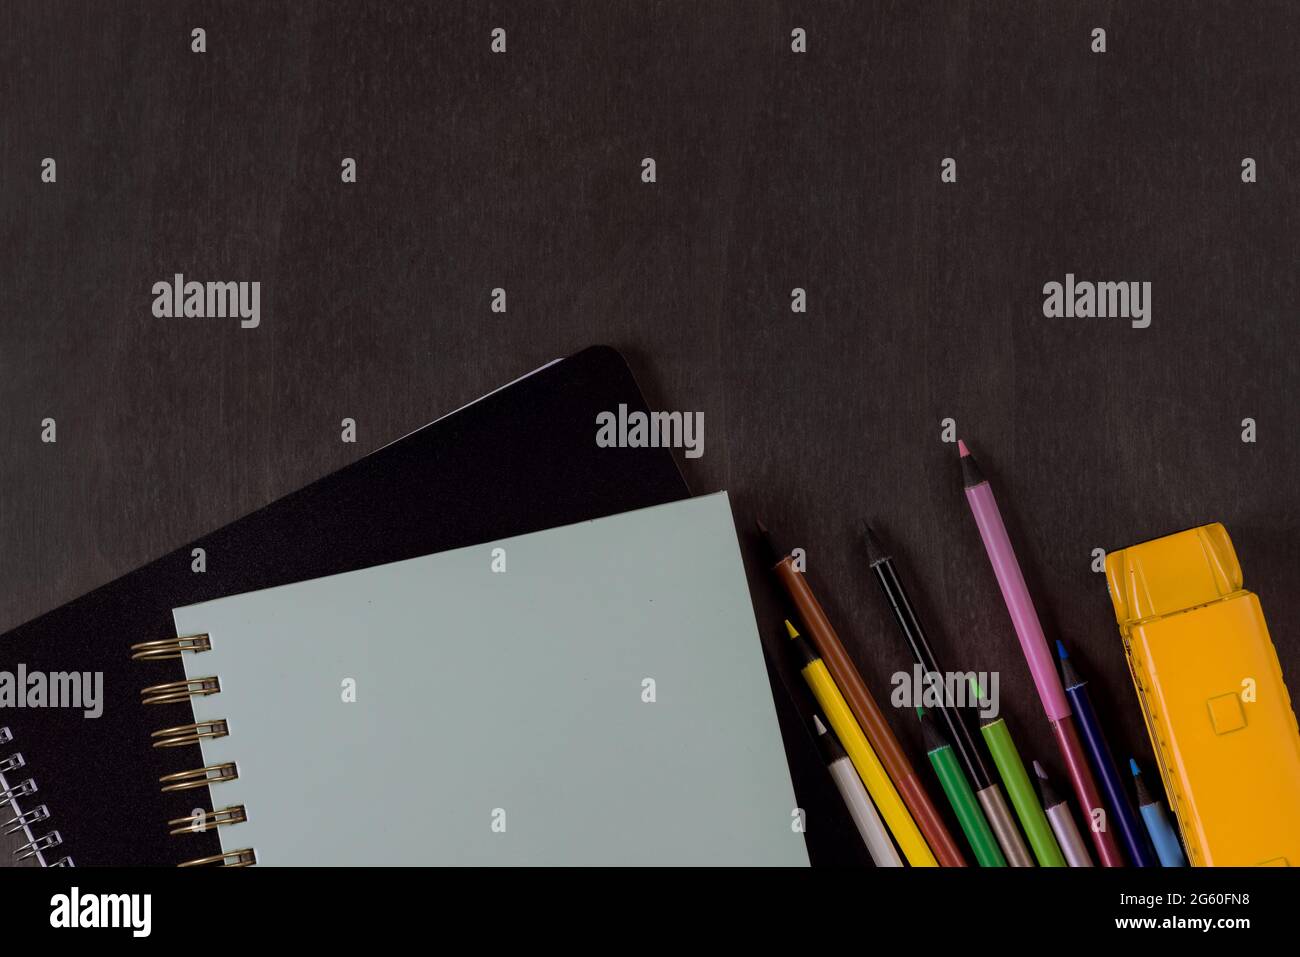 Assortment school supplies items of various stationery equipment Stock Photo